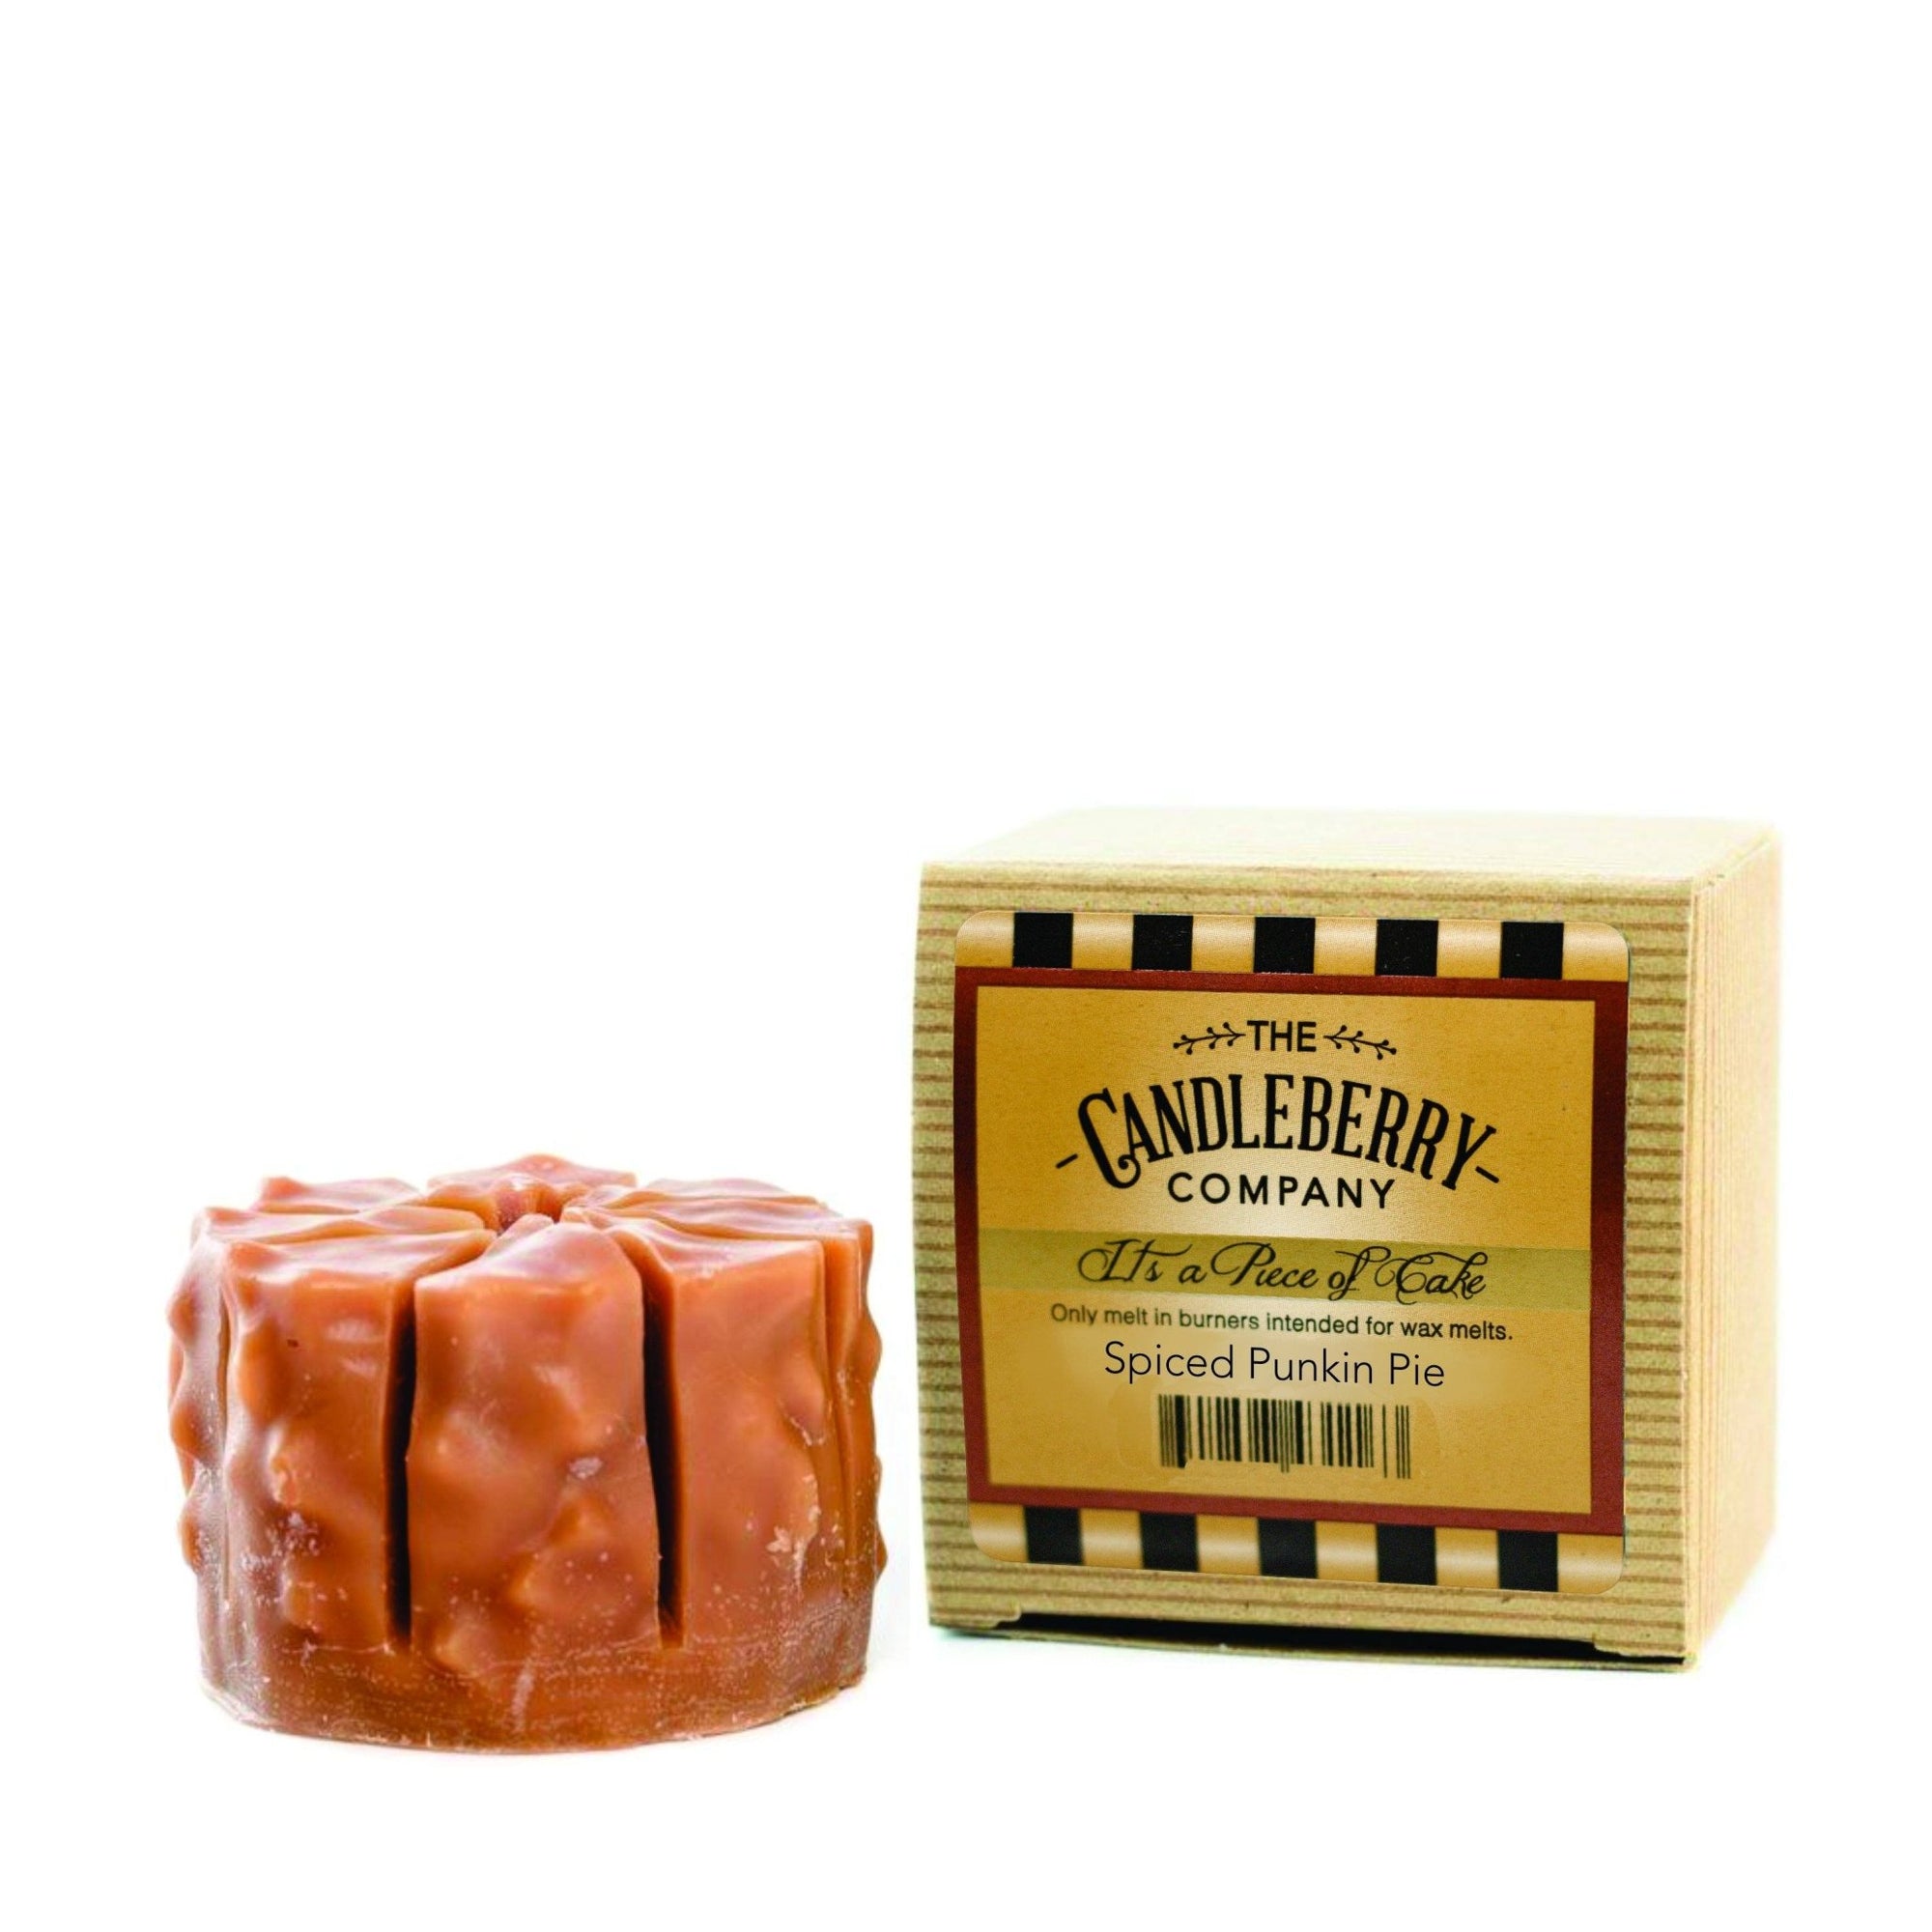 Spiced Punkin Pie, "It's a Piece of Cake" Scented Wax Melts "It's a Piece of Cake"® Wax Melts The Candleberry® Candle Company 